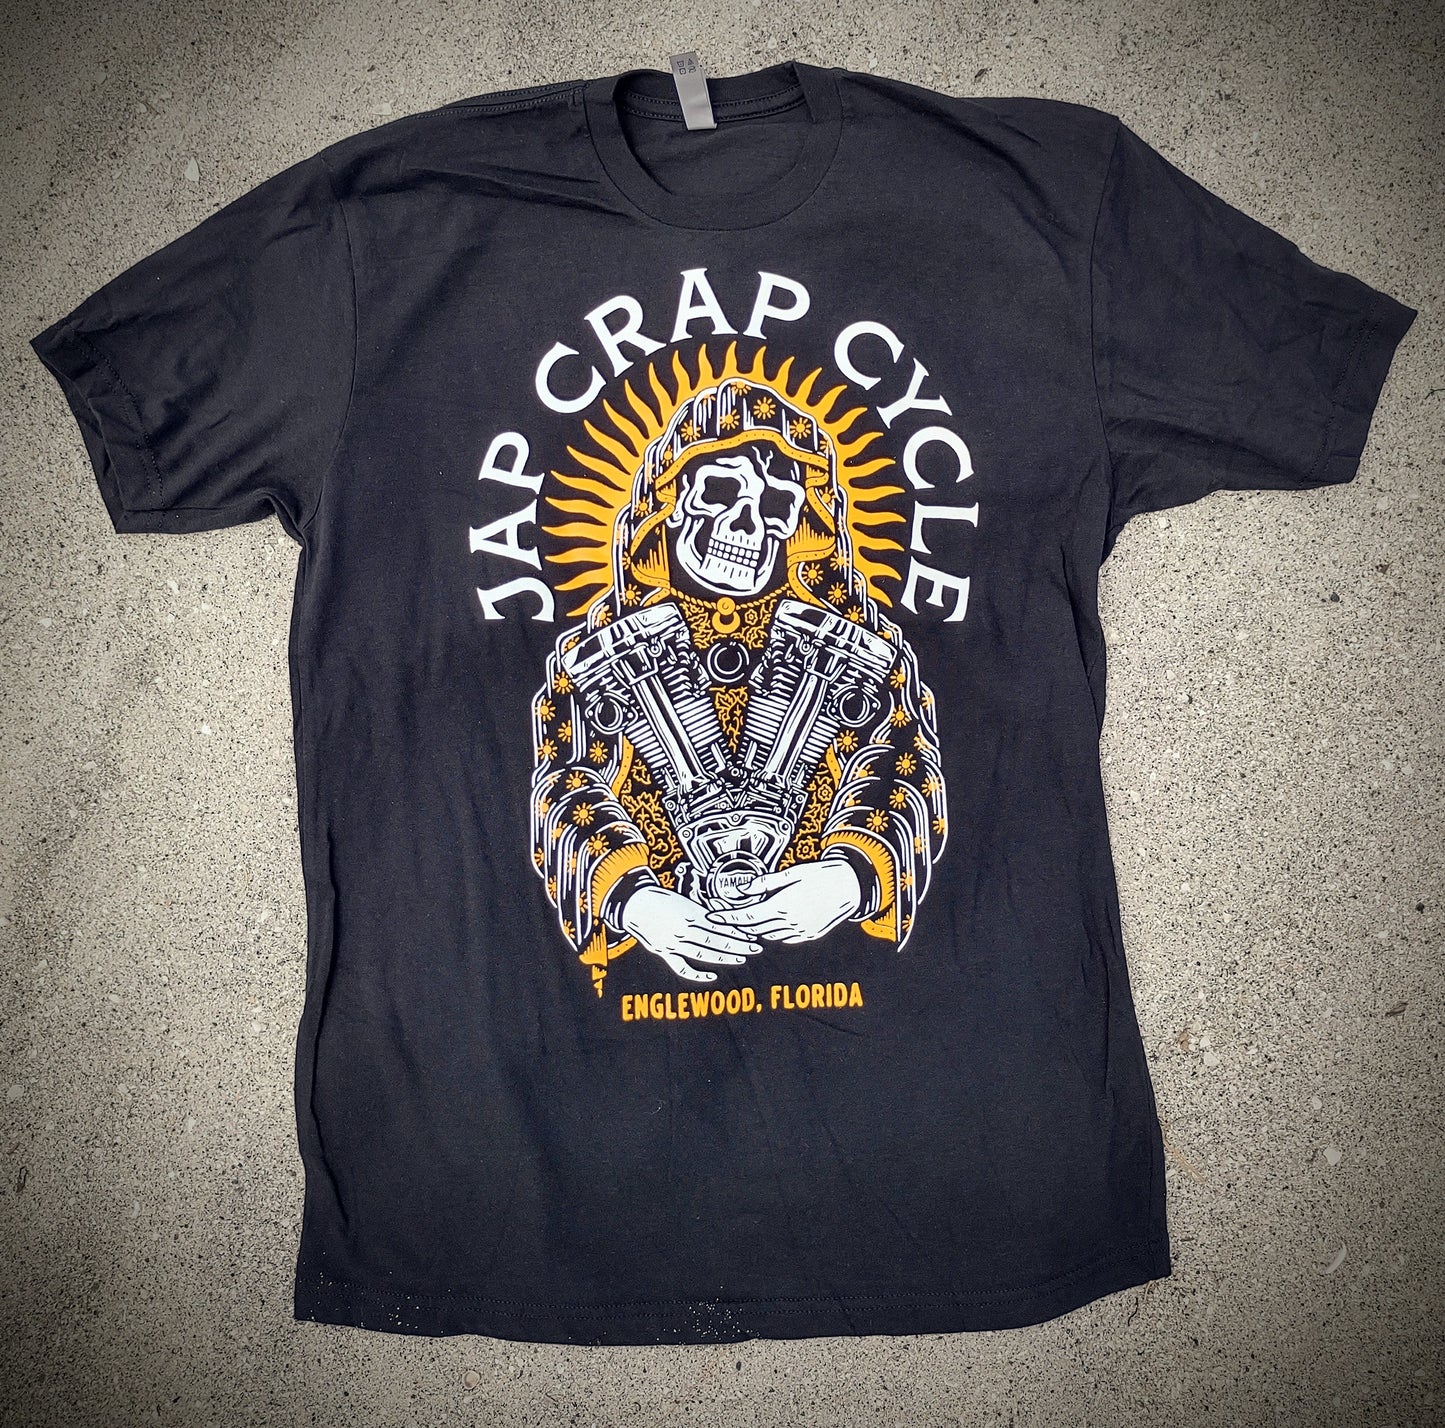 "Our Lady of Jap Crap" short sleeve shirt